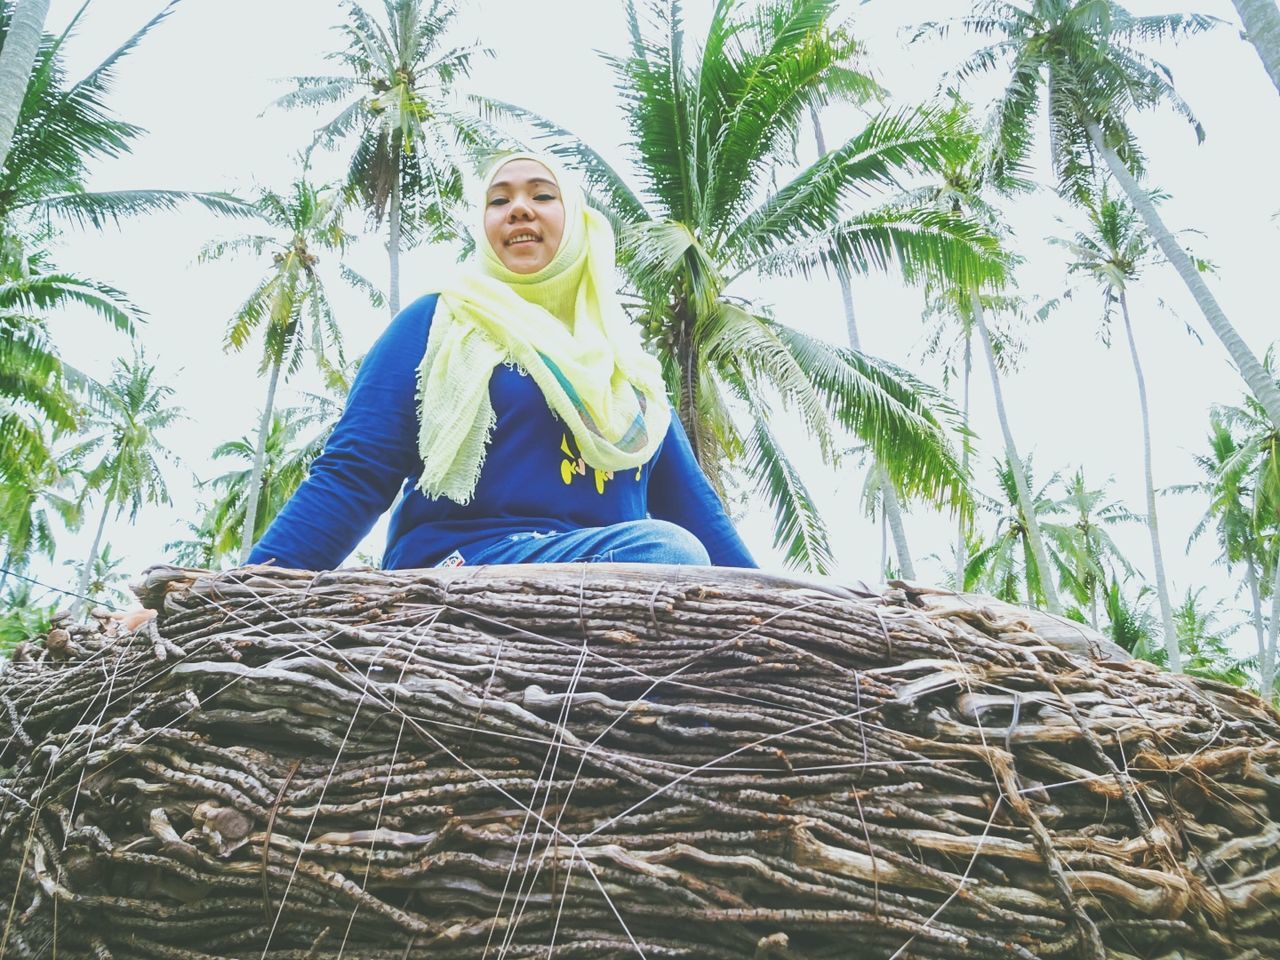 one person, plant, agriculture, smiling, adult, tree, nature, portrait, happiness, front view, looking at camera, palm tree, day, emotion, women, low angle view, outdoors, sky, tropical climate, crop, blue, sitting, leisure activity, lifestyles, casual clothing, person, rural scene